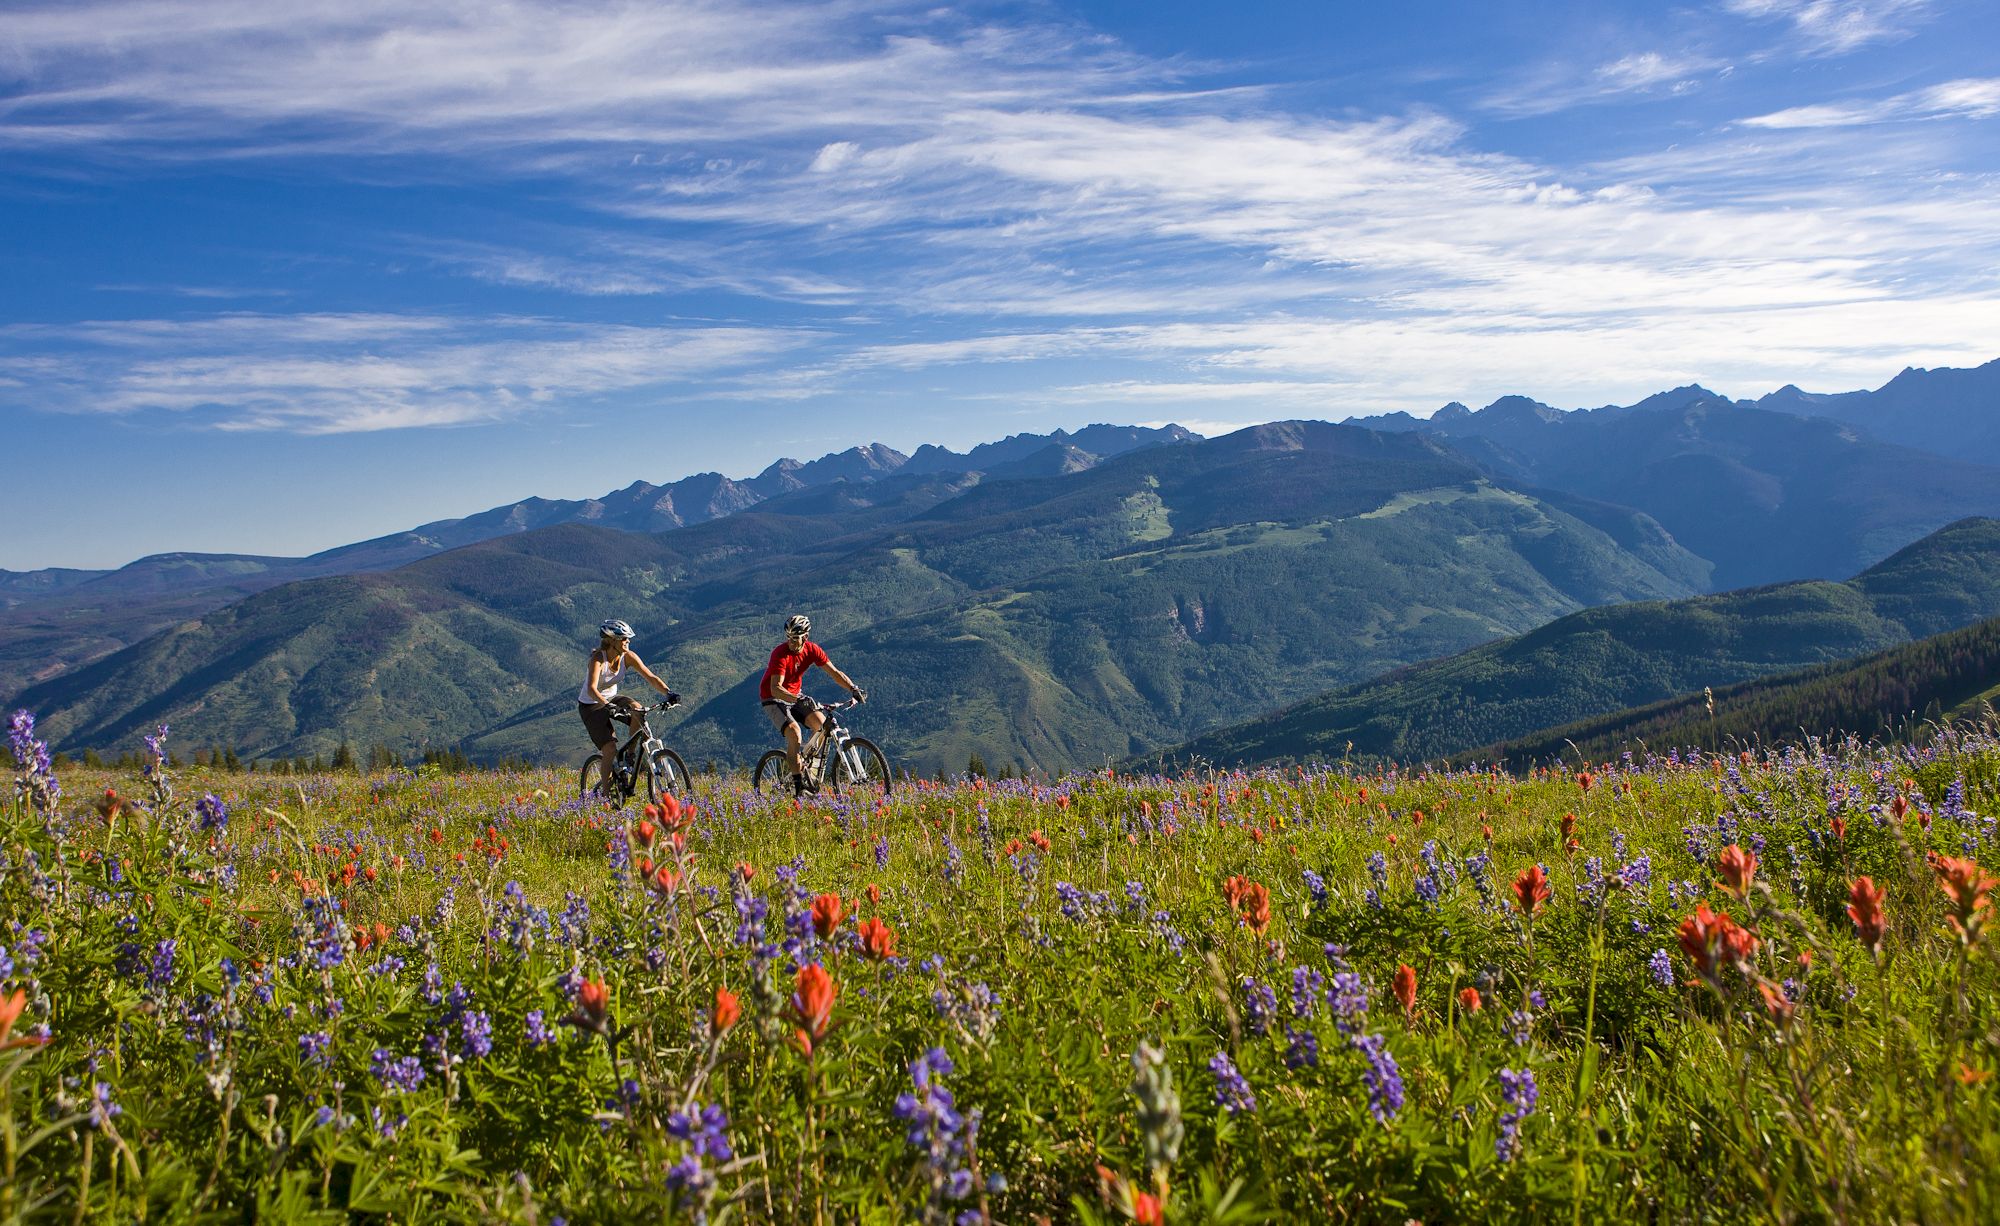 Two people are mountain biking through a field of colorful wildflowers with a backdrop of majestic mountains under a bright, partly cloudy sky.